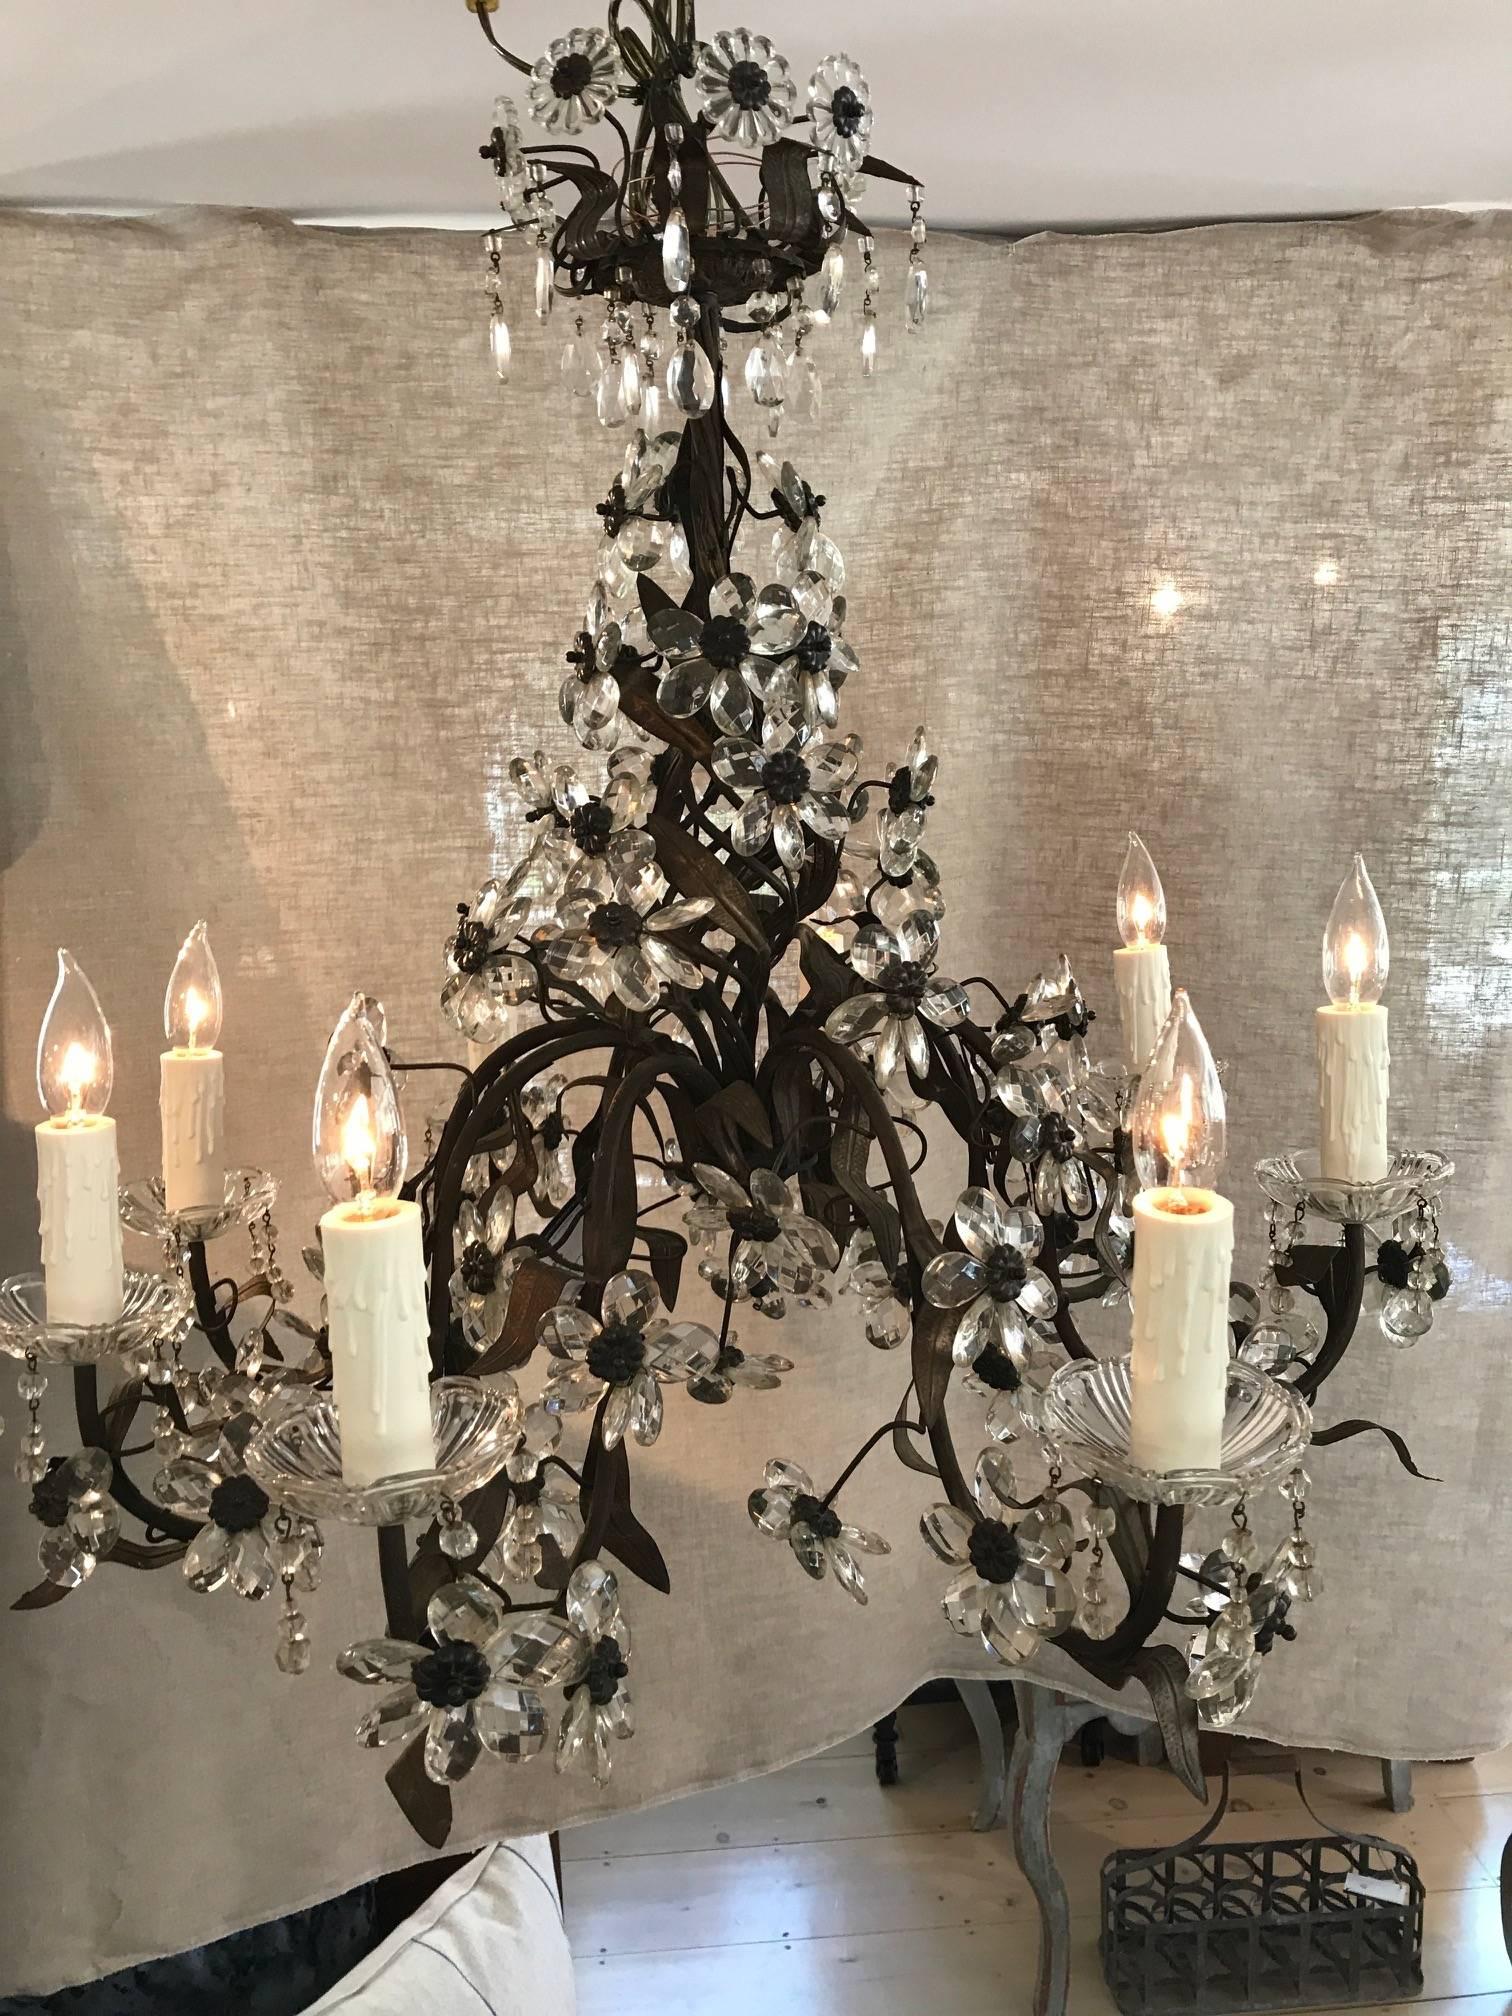 Beautiful crystal eight-light French floral chandelier with smooth cut crystal flowers and brass leaves and accents. The condition is very good, and it is newly rewired. Drop height can be adjusted. It was bought in Montpellier, France.

Measure: